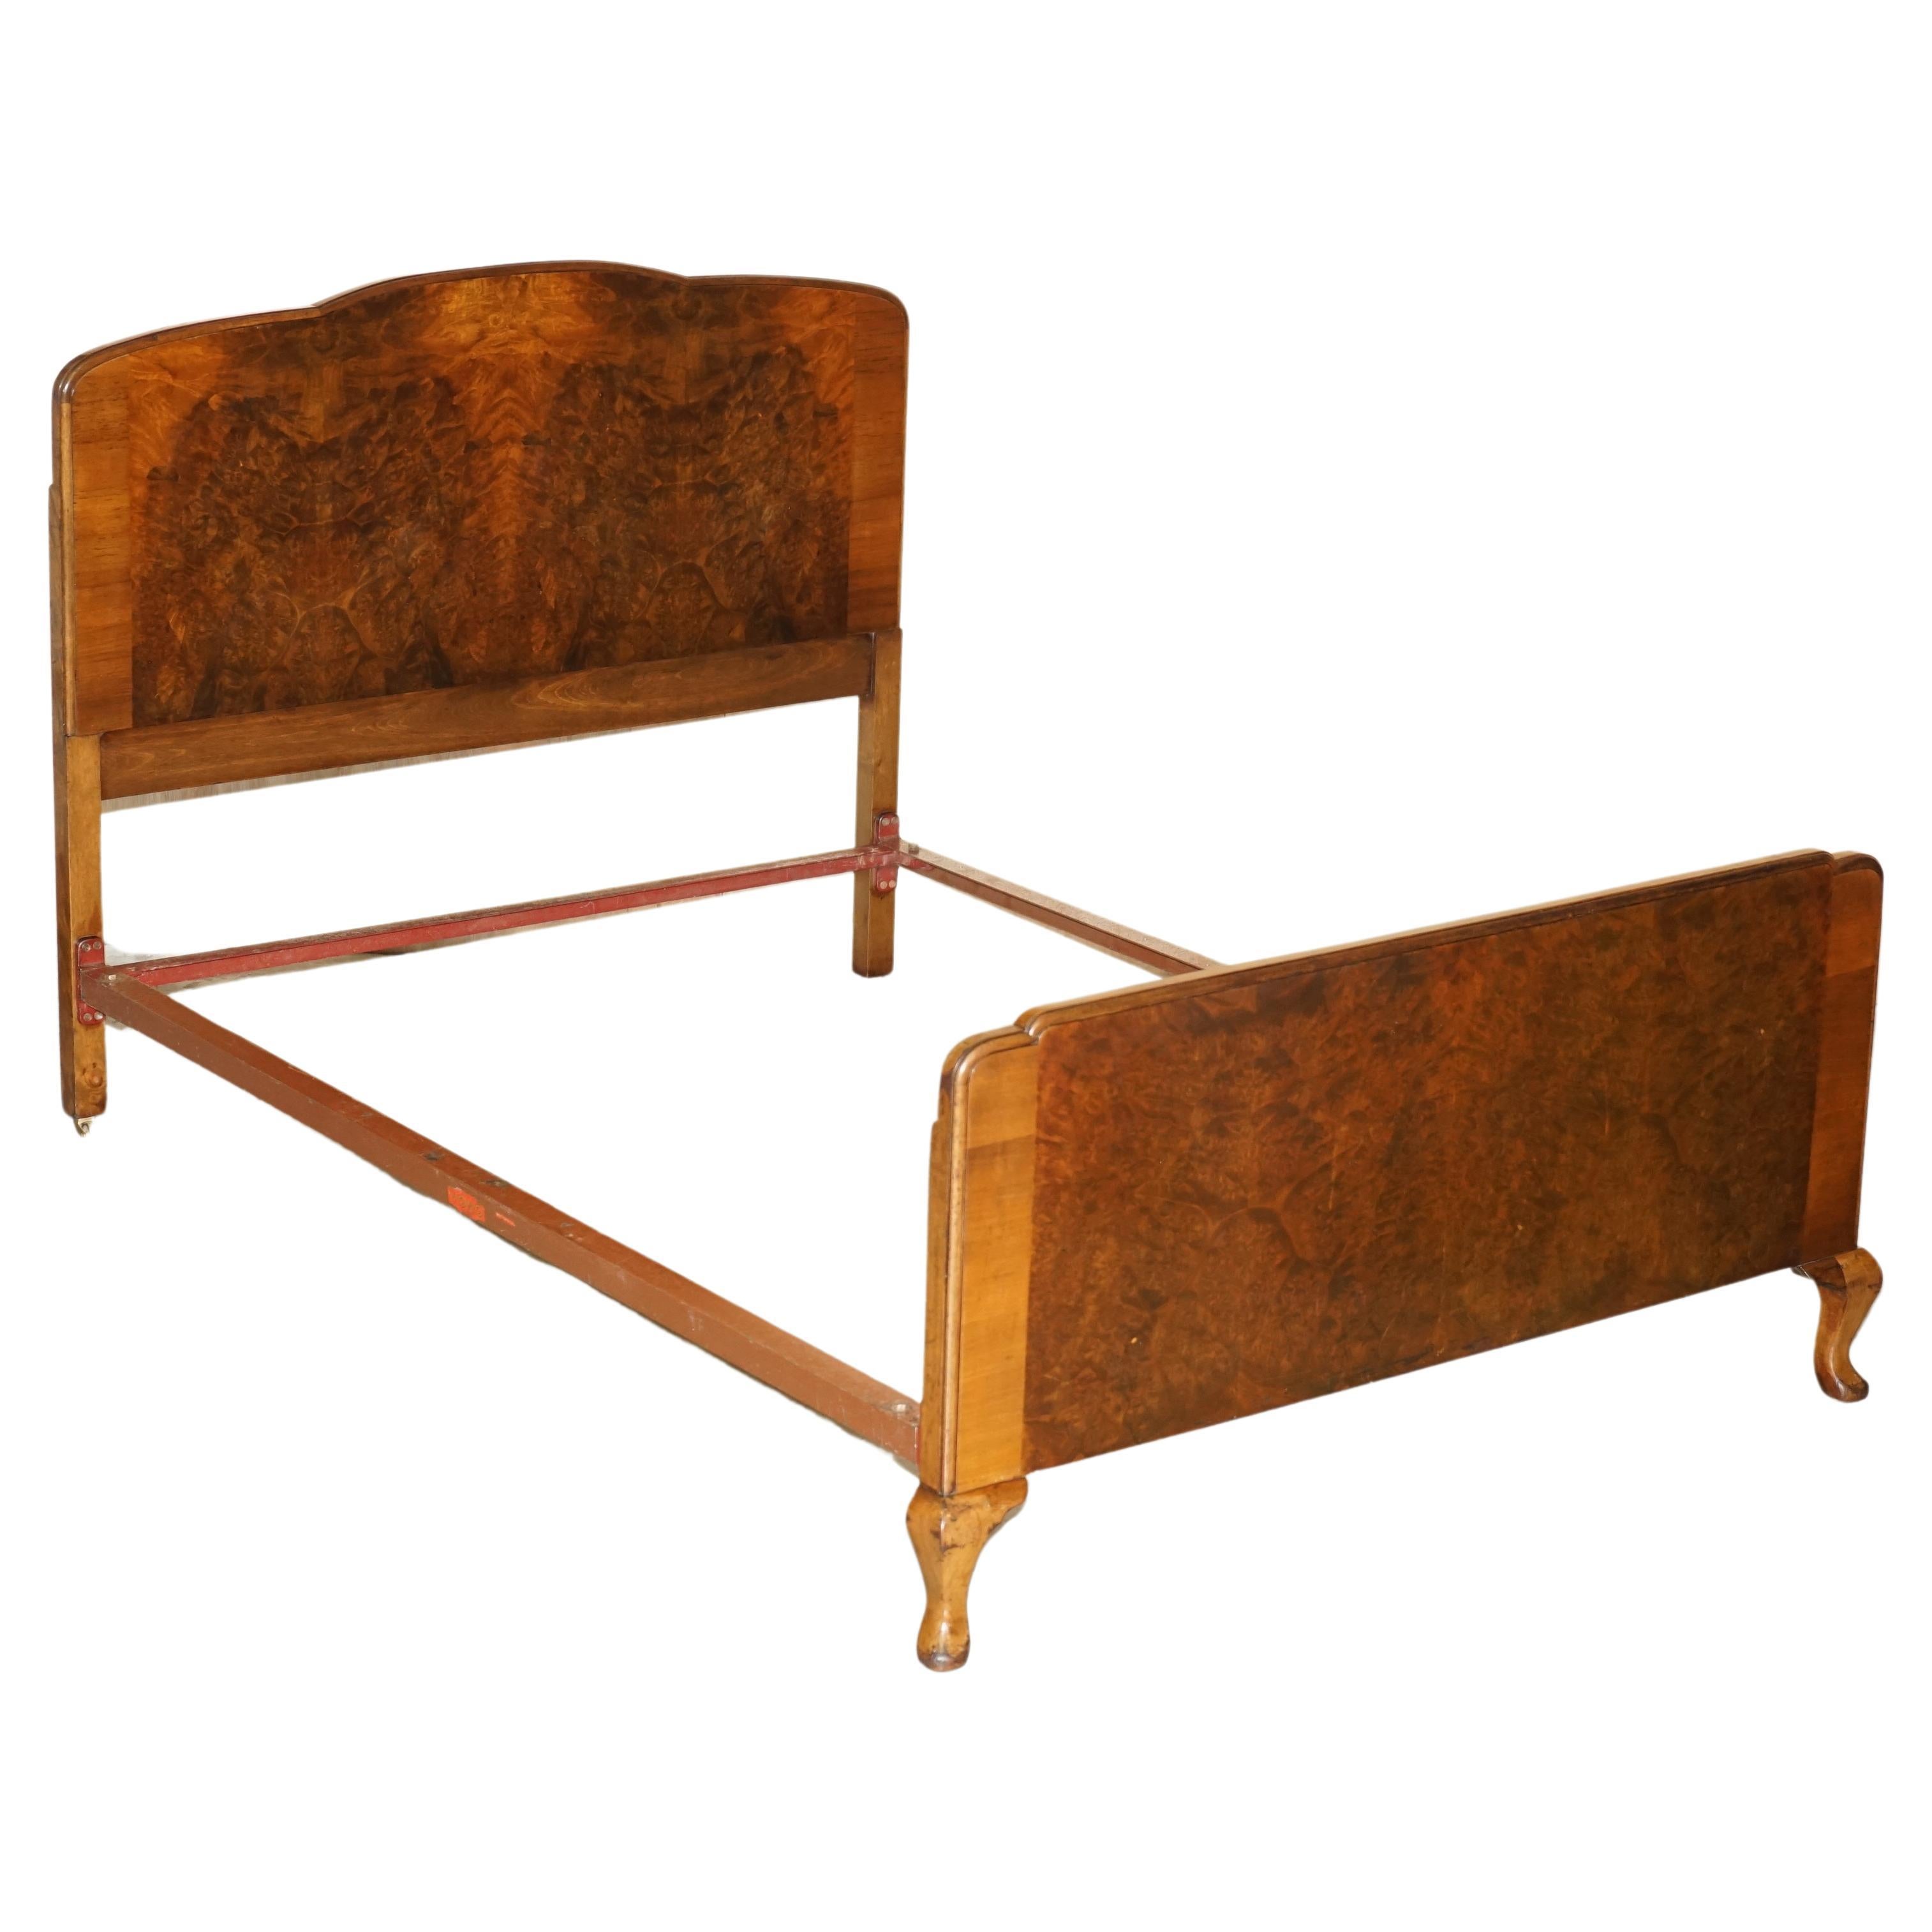 LOVELY WARiNG & GILLOW 1932 STAMPED BURR WALNUT DOUBLE BEDSTEAD BED FRAME